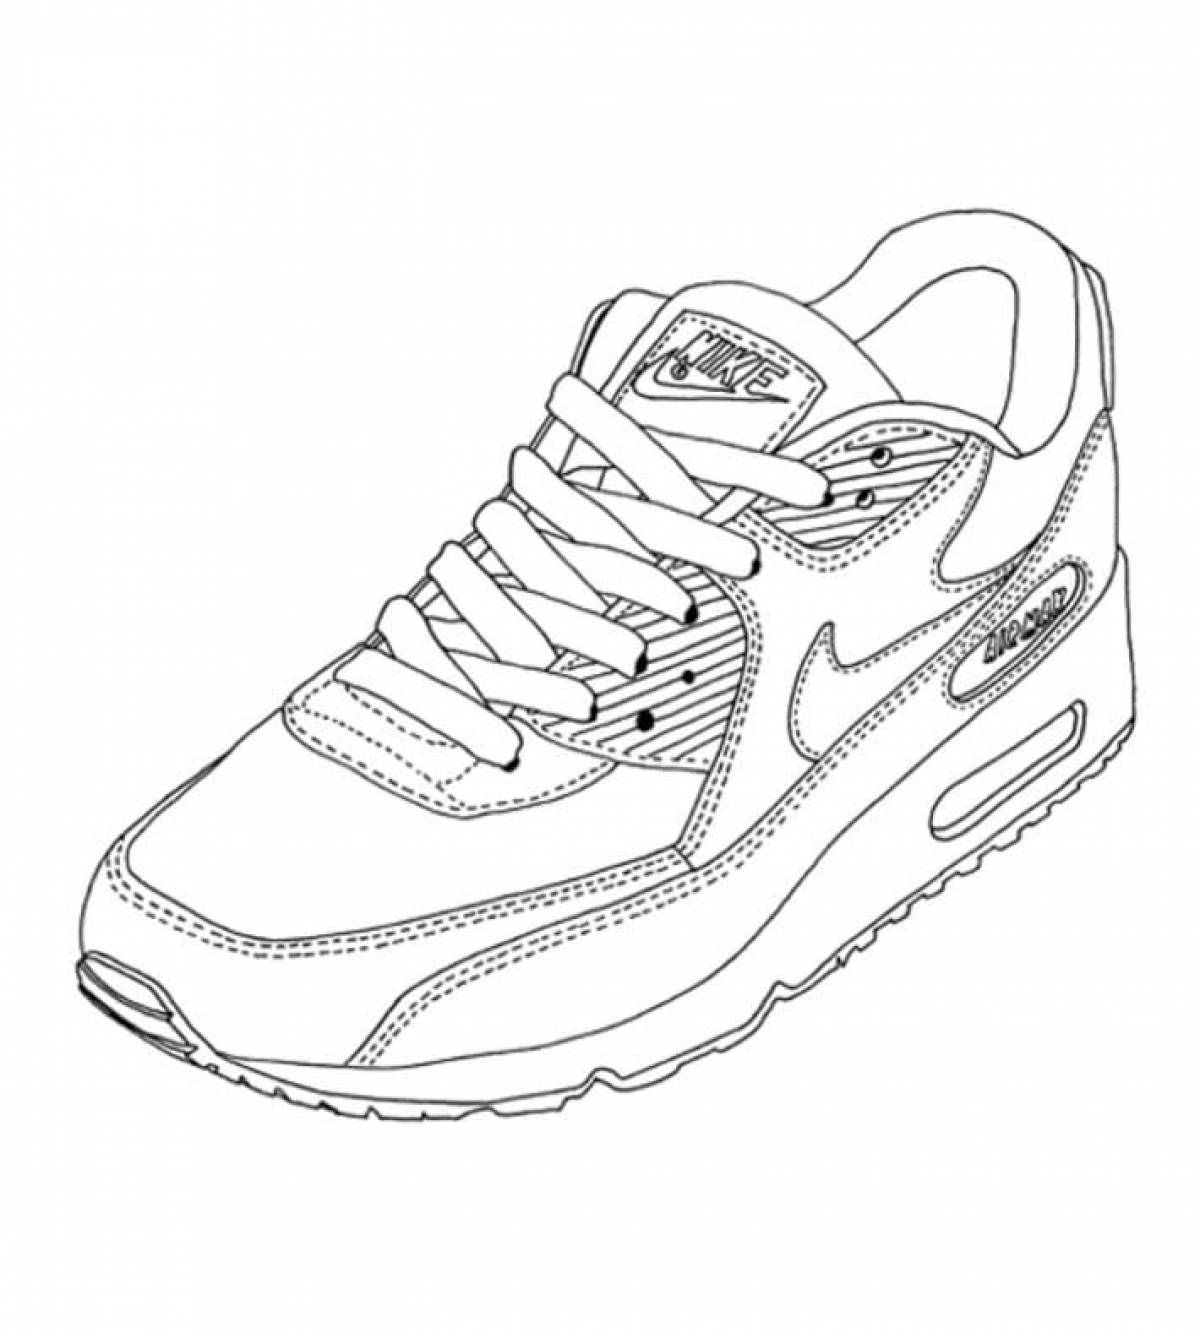 Coloring page adorable sneakers